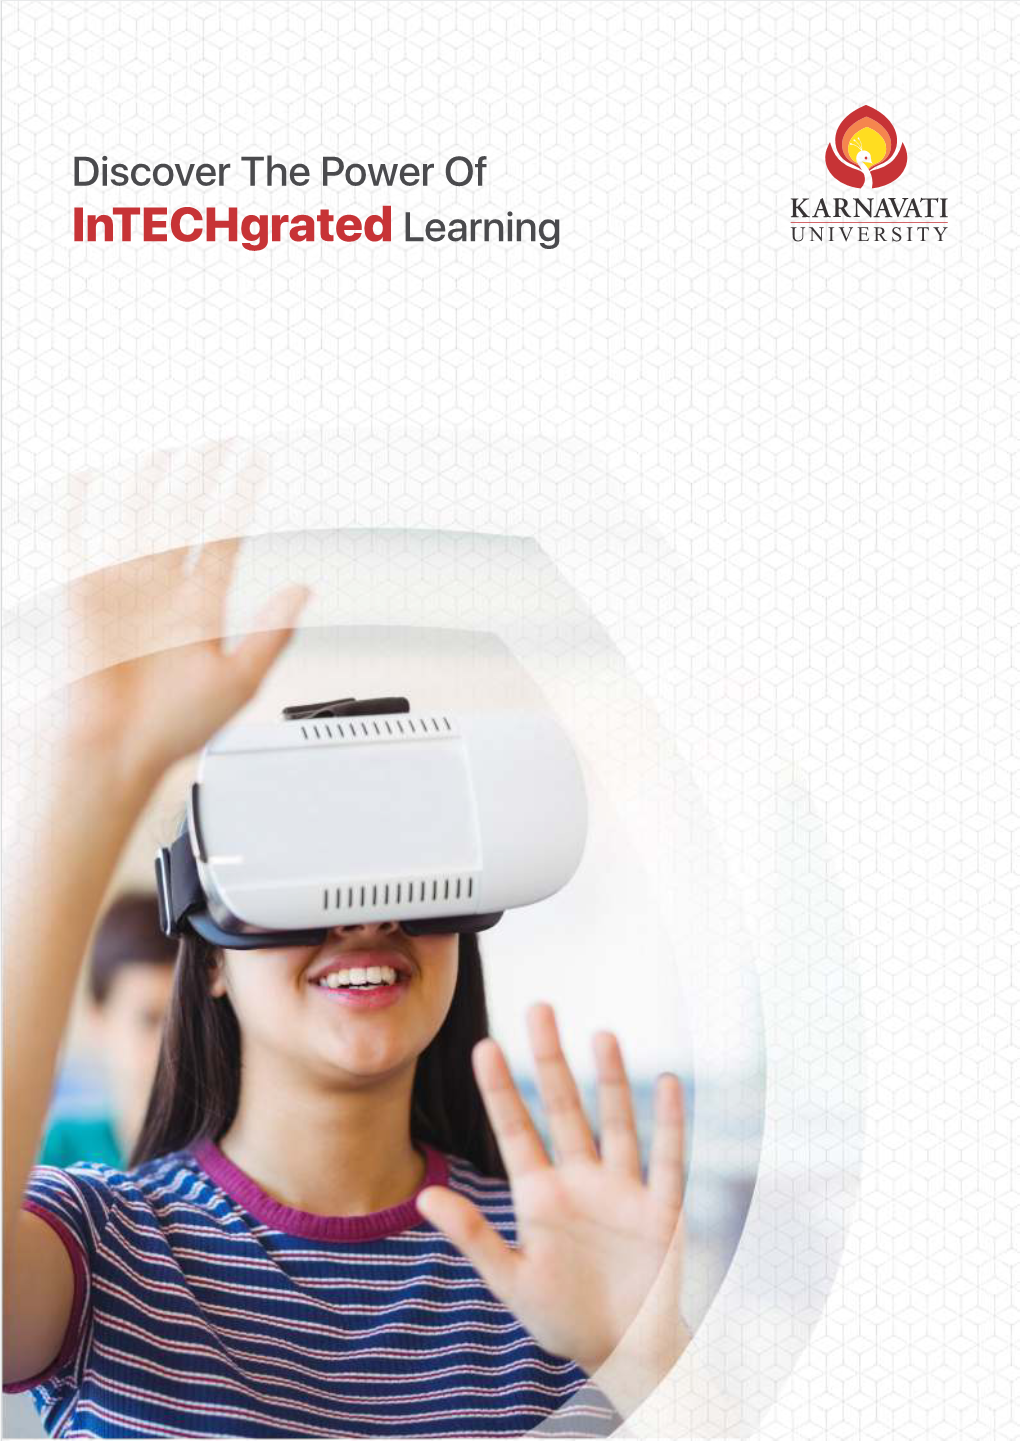 Intechgrated Learning